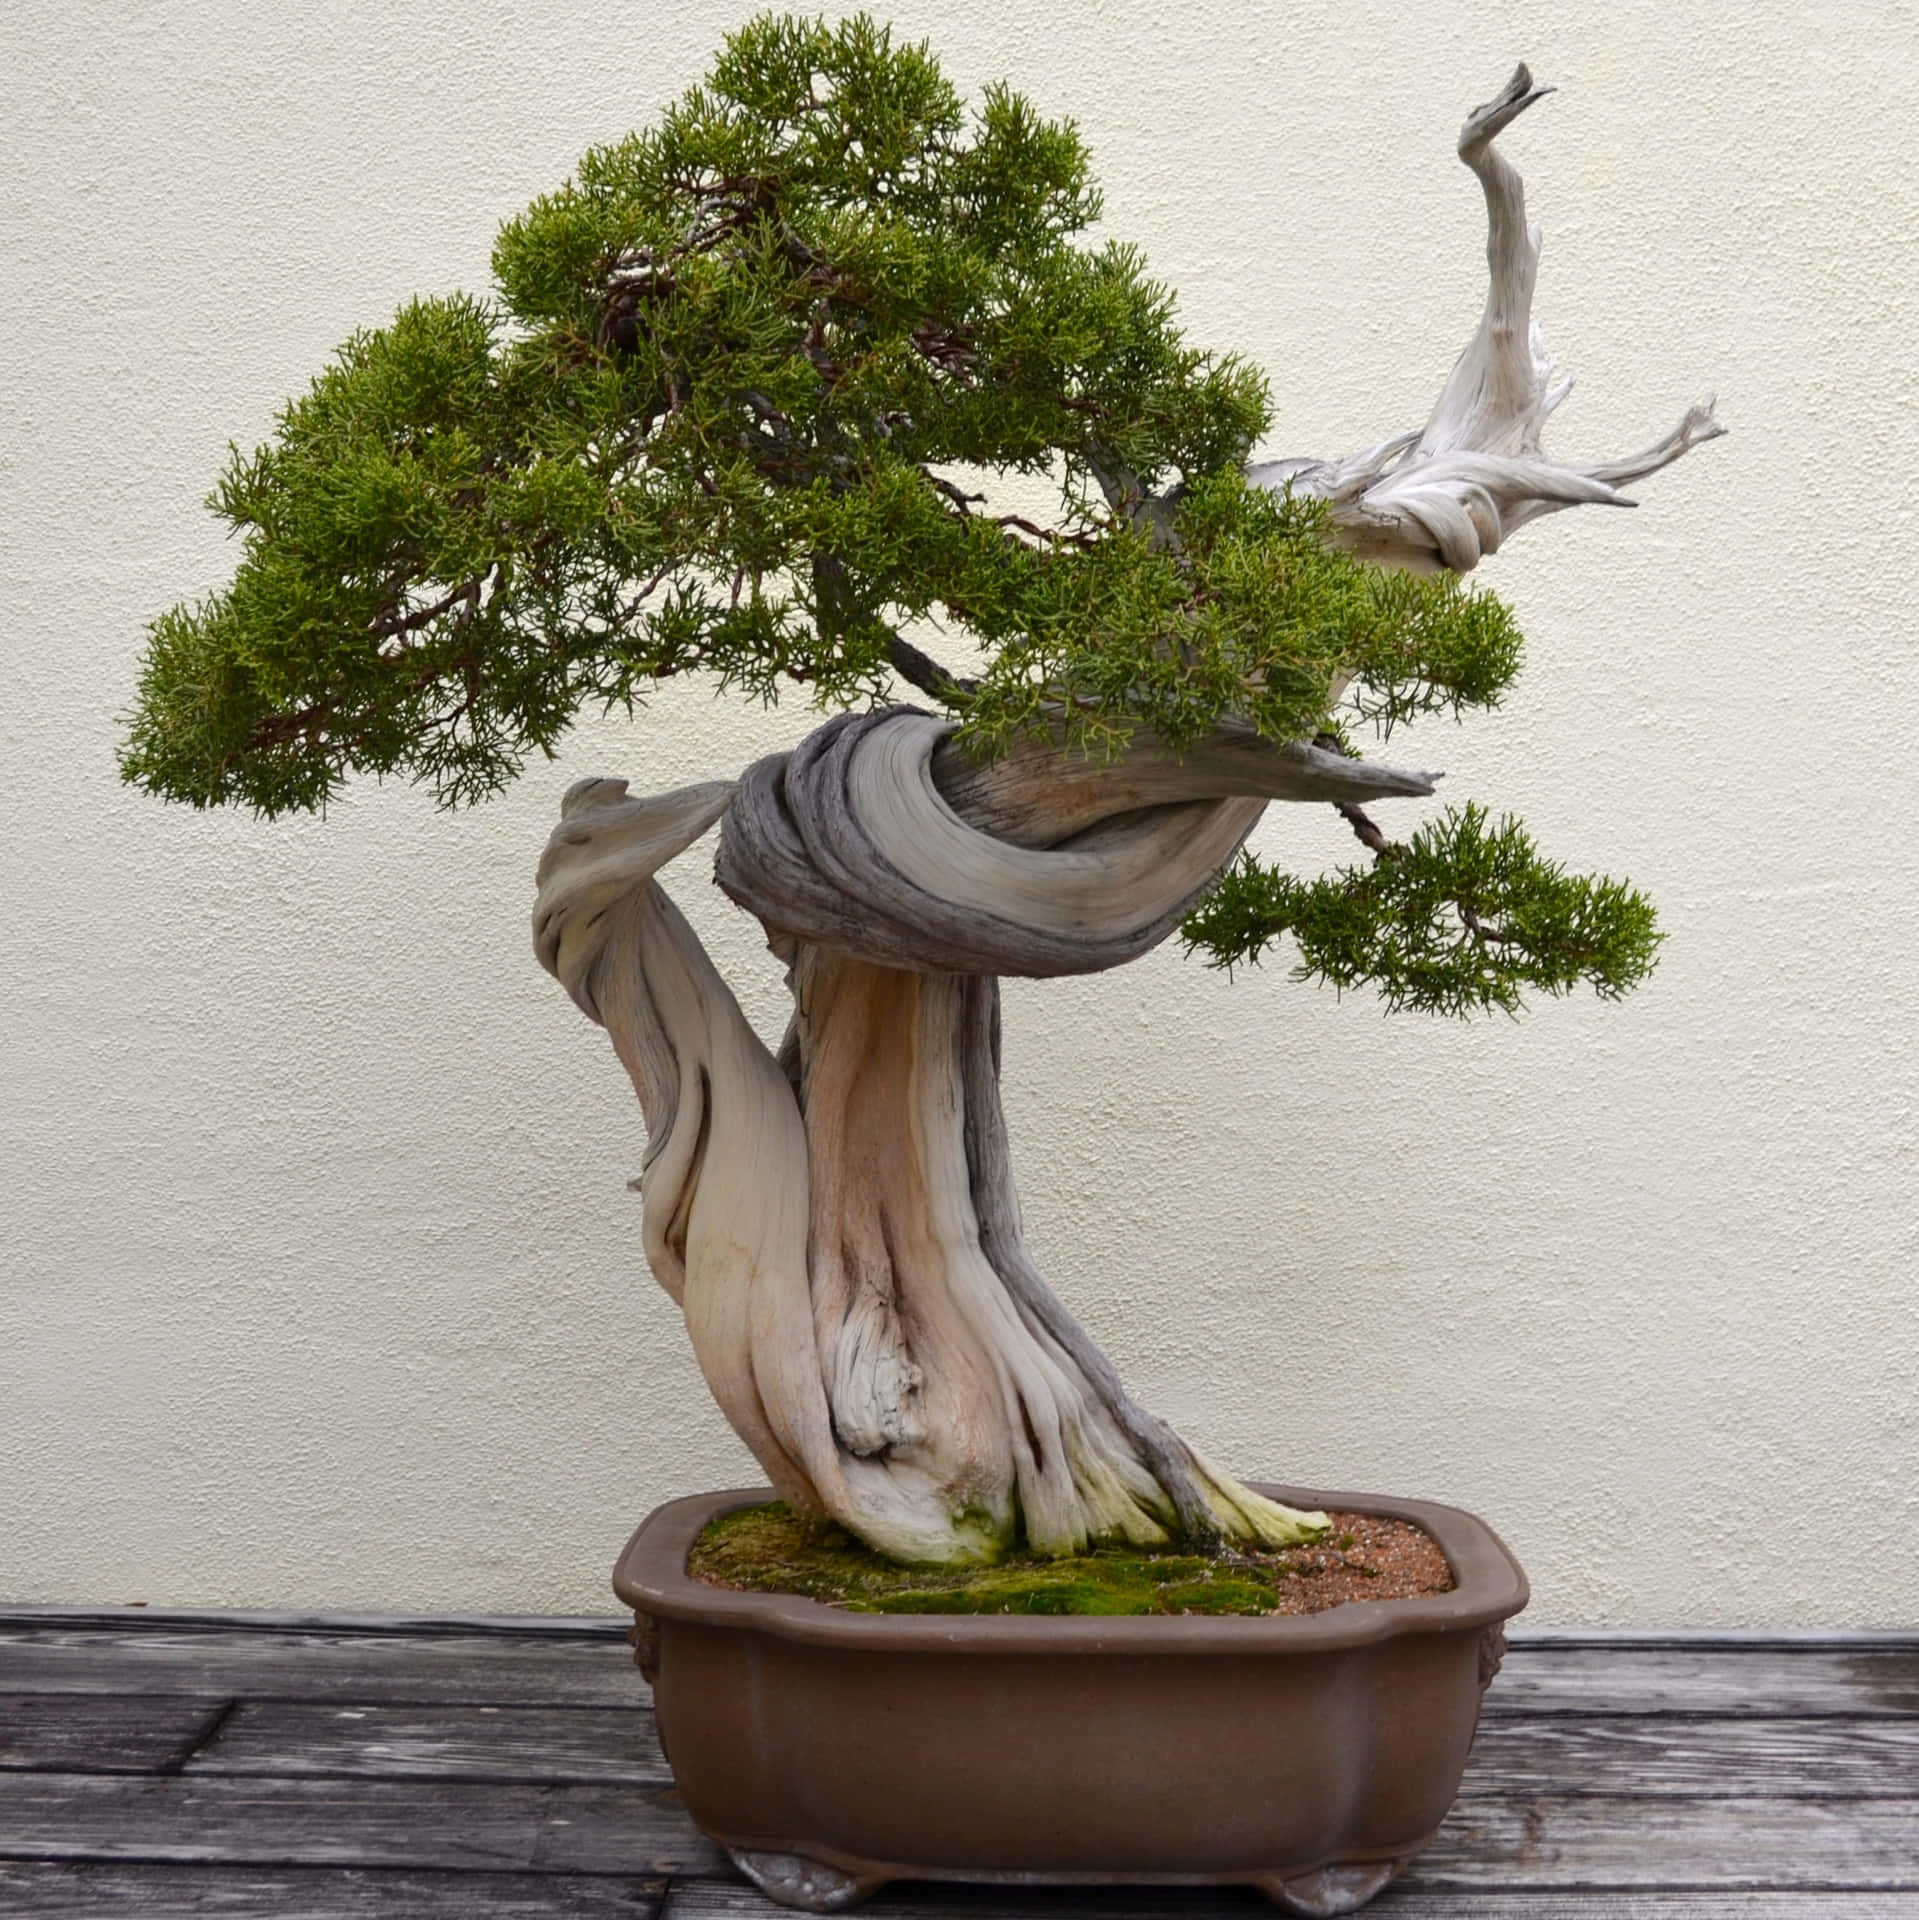 A Bonsai Tree In A Pot On A Wooden Table